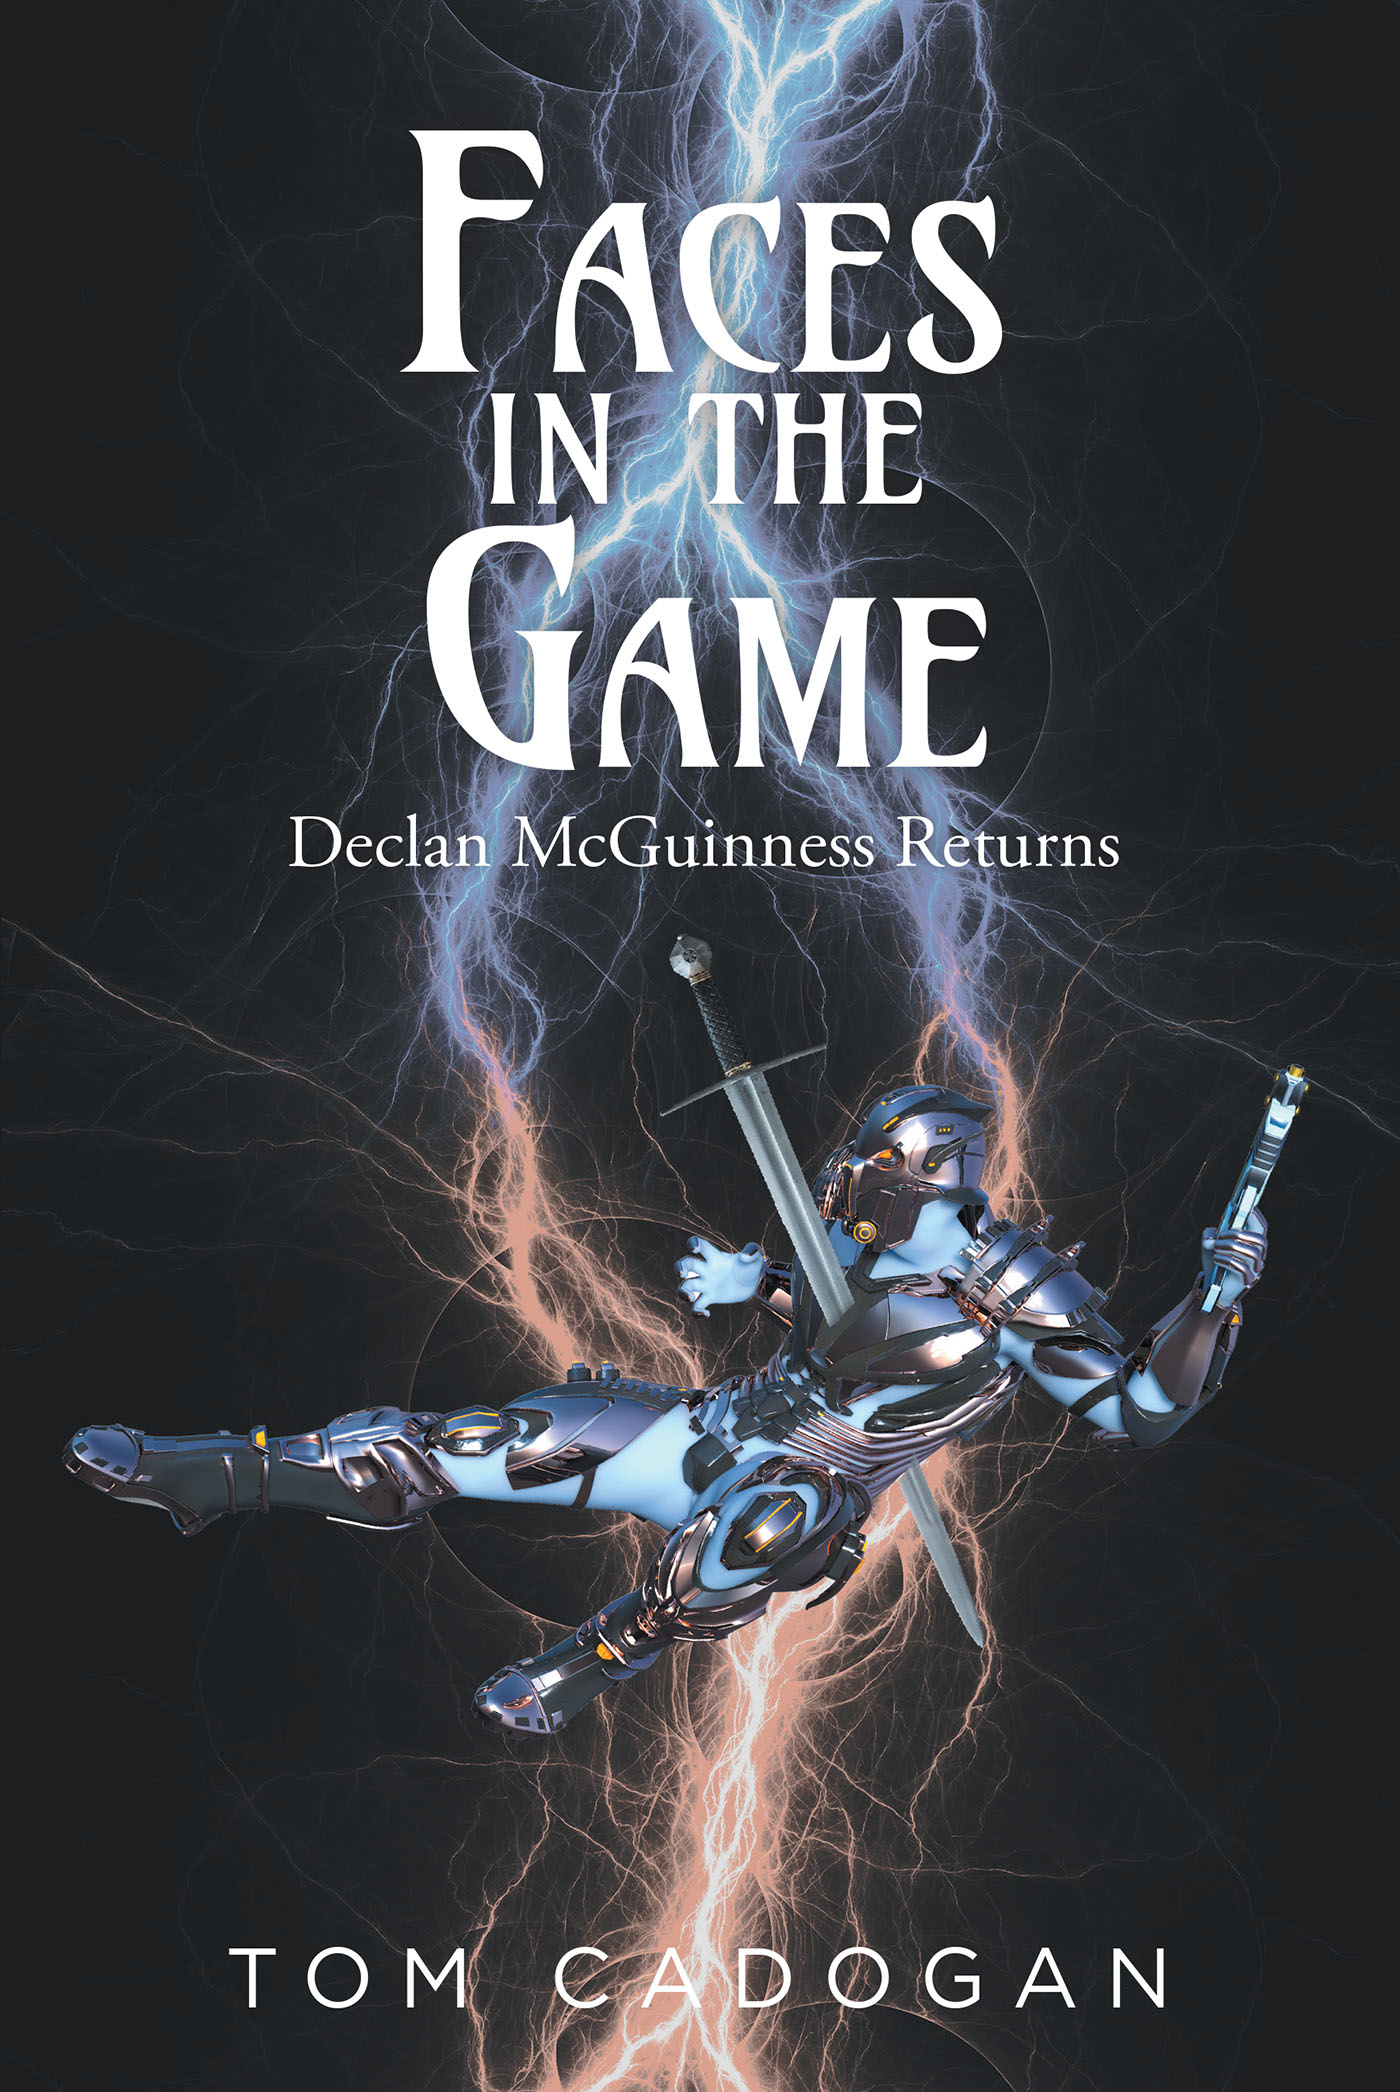 Tom Cadogan’s New Book, "Faces in the Game: Declan McGuinness Returns," Centers Around the Disappearance of a CEO and the Discovery of a Larger Conspiracy and Cover-Up